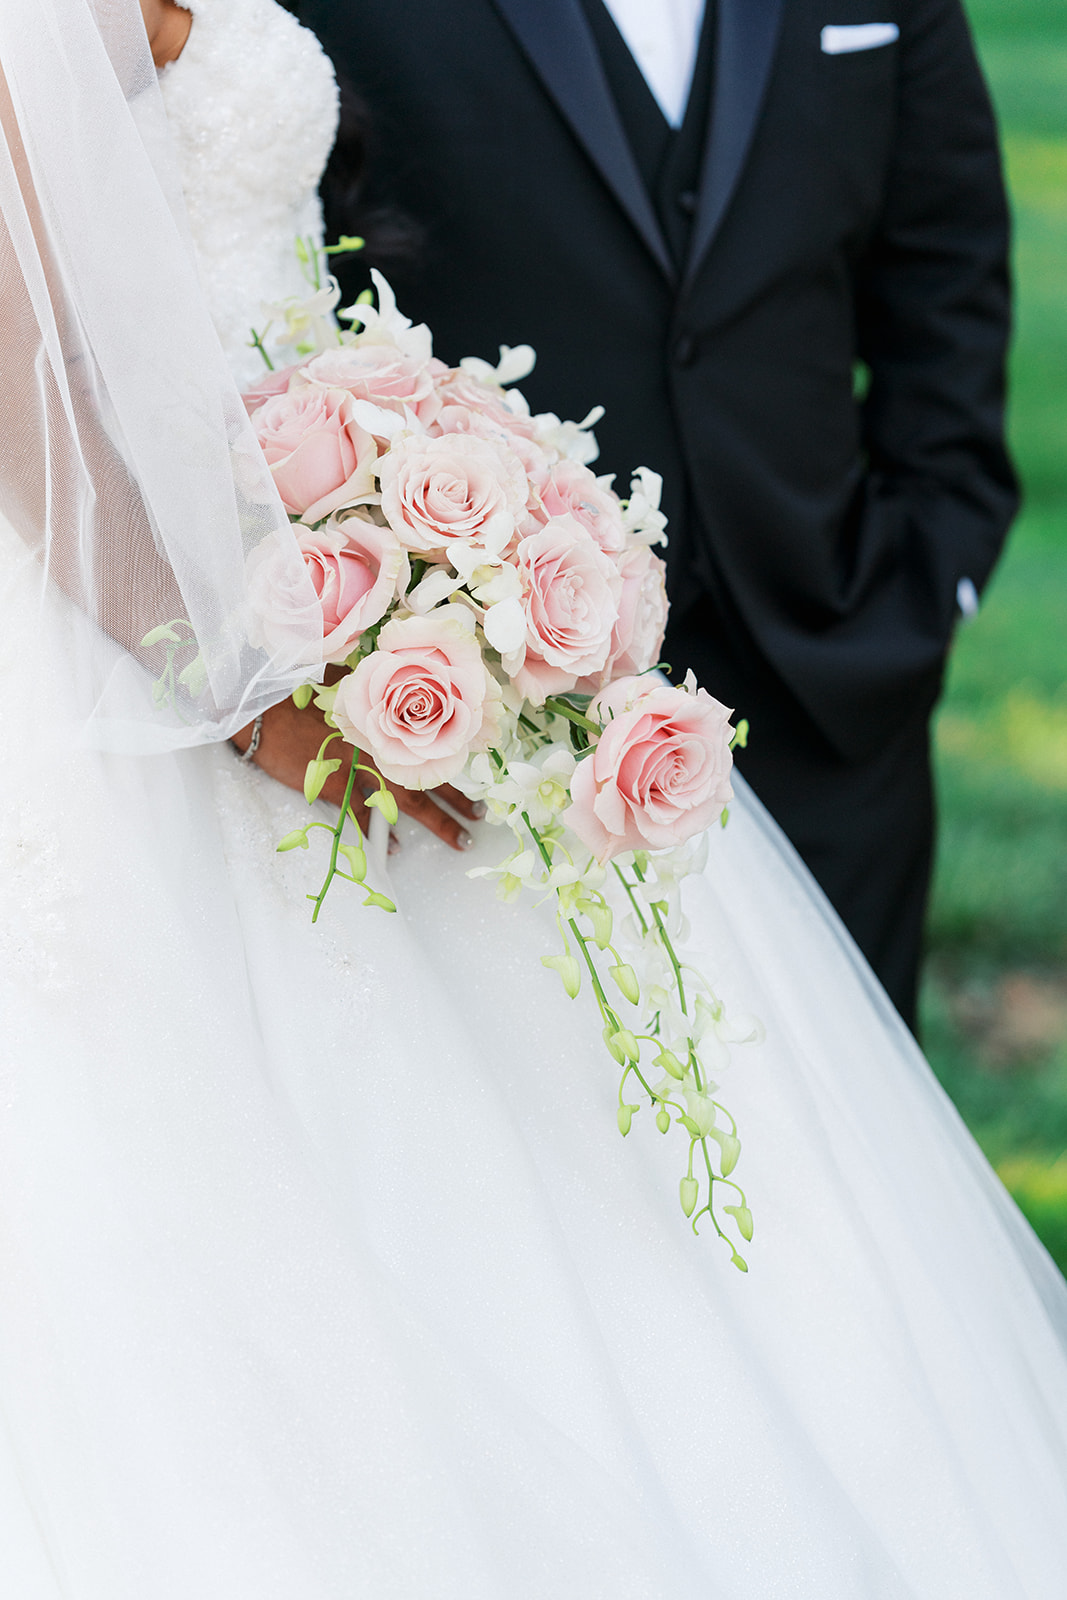 Details of a bride holding her pink rose bouquet